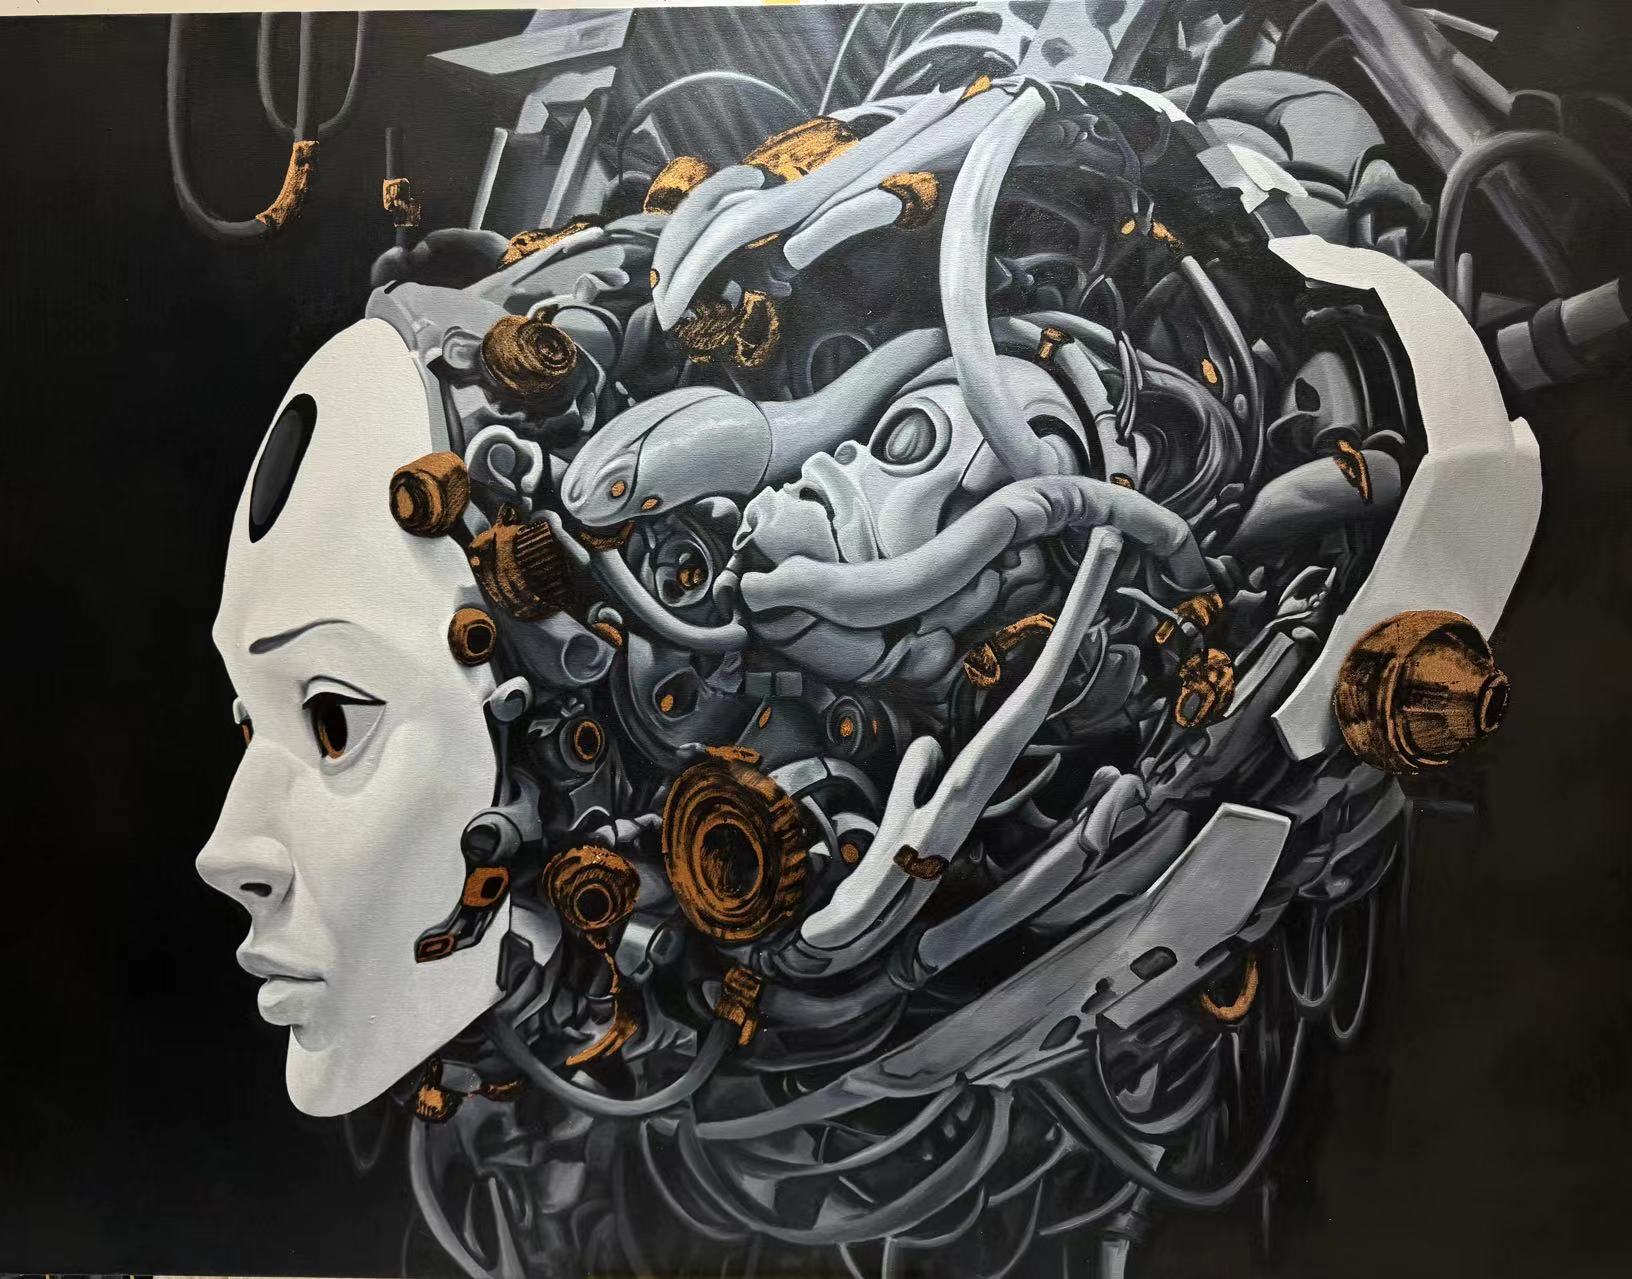 “Black&Golden Painting”-Mechanical Ascent with framed